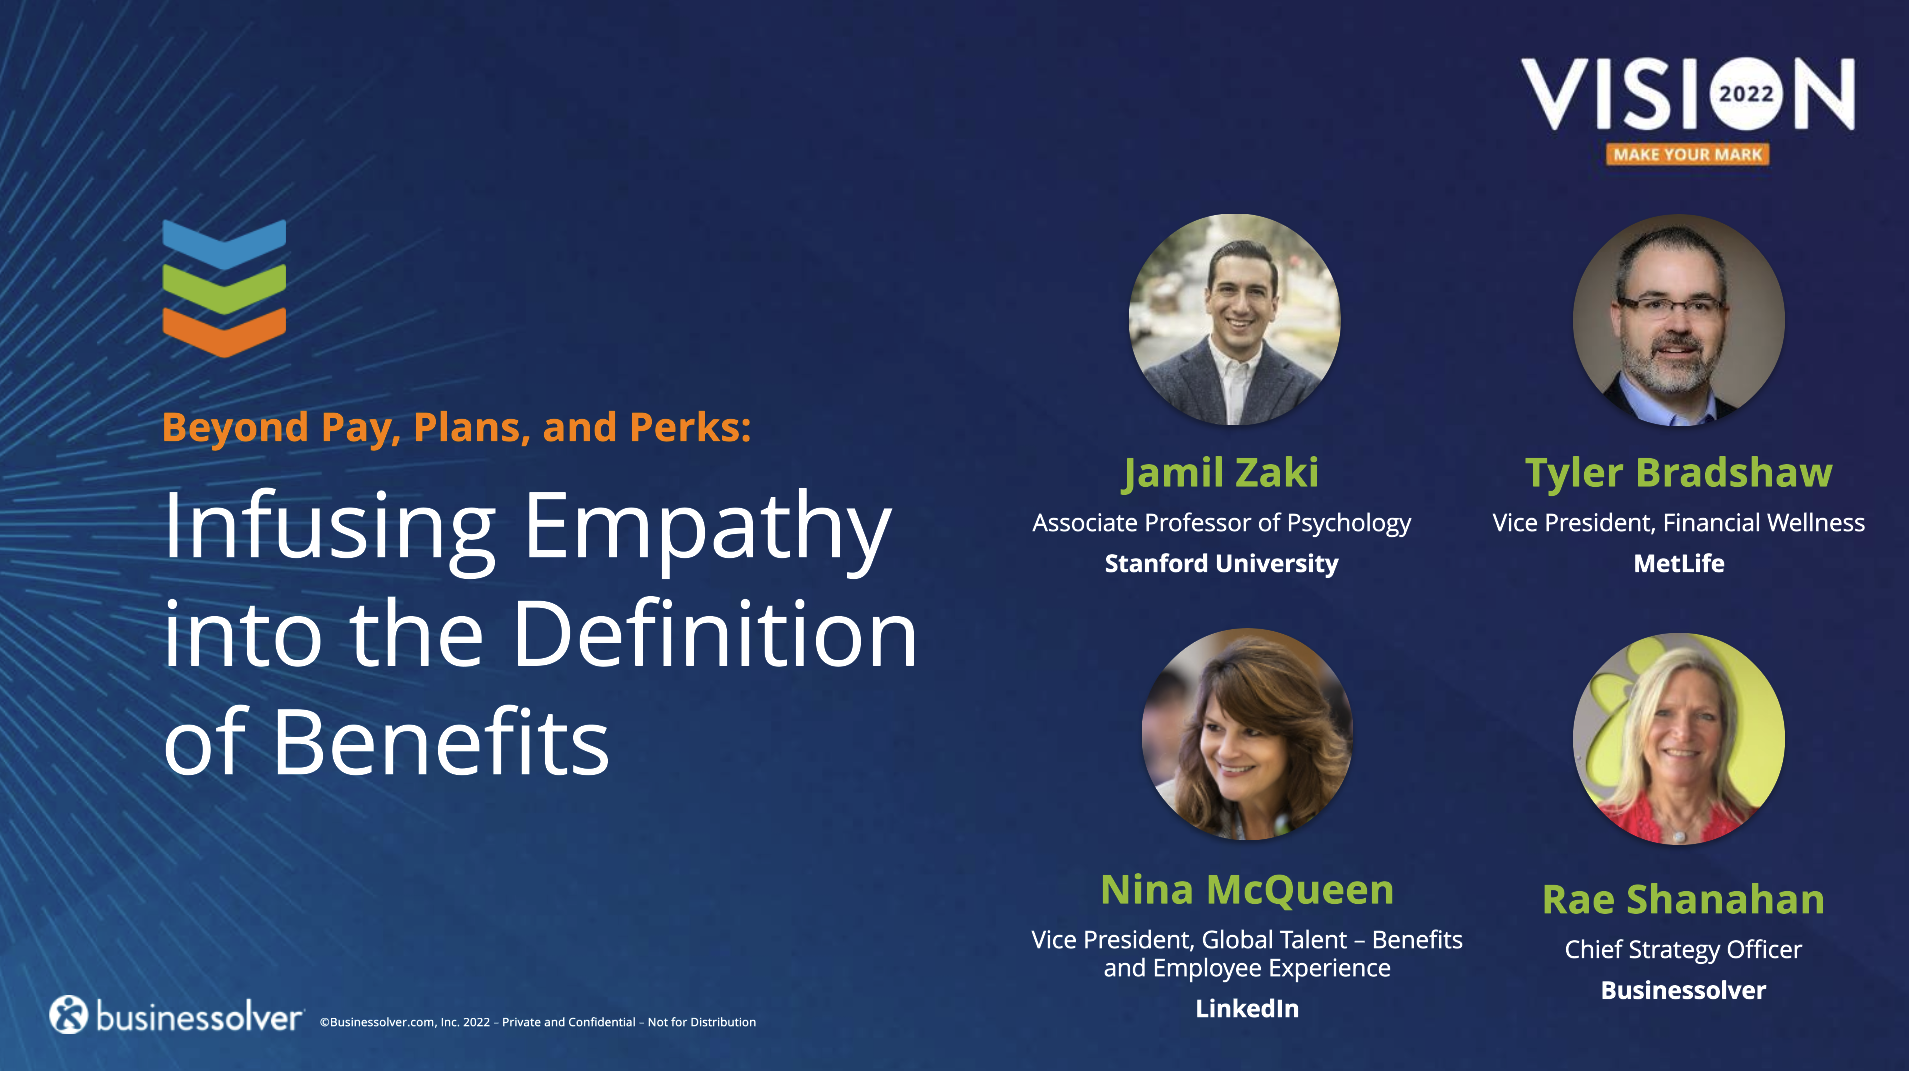 Infusing Empathy into the Definition of Benefits